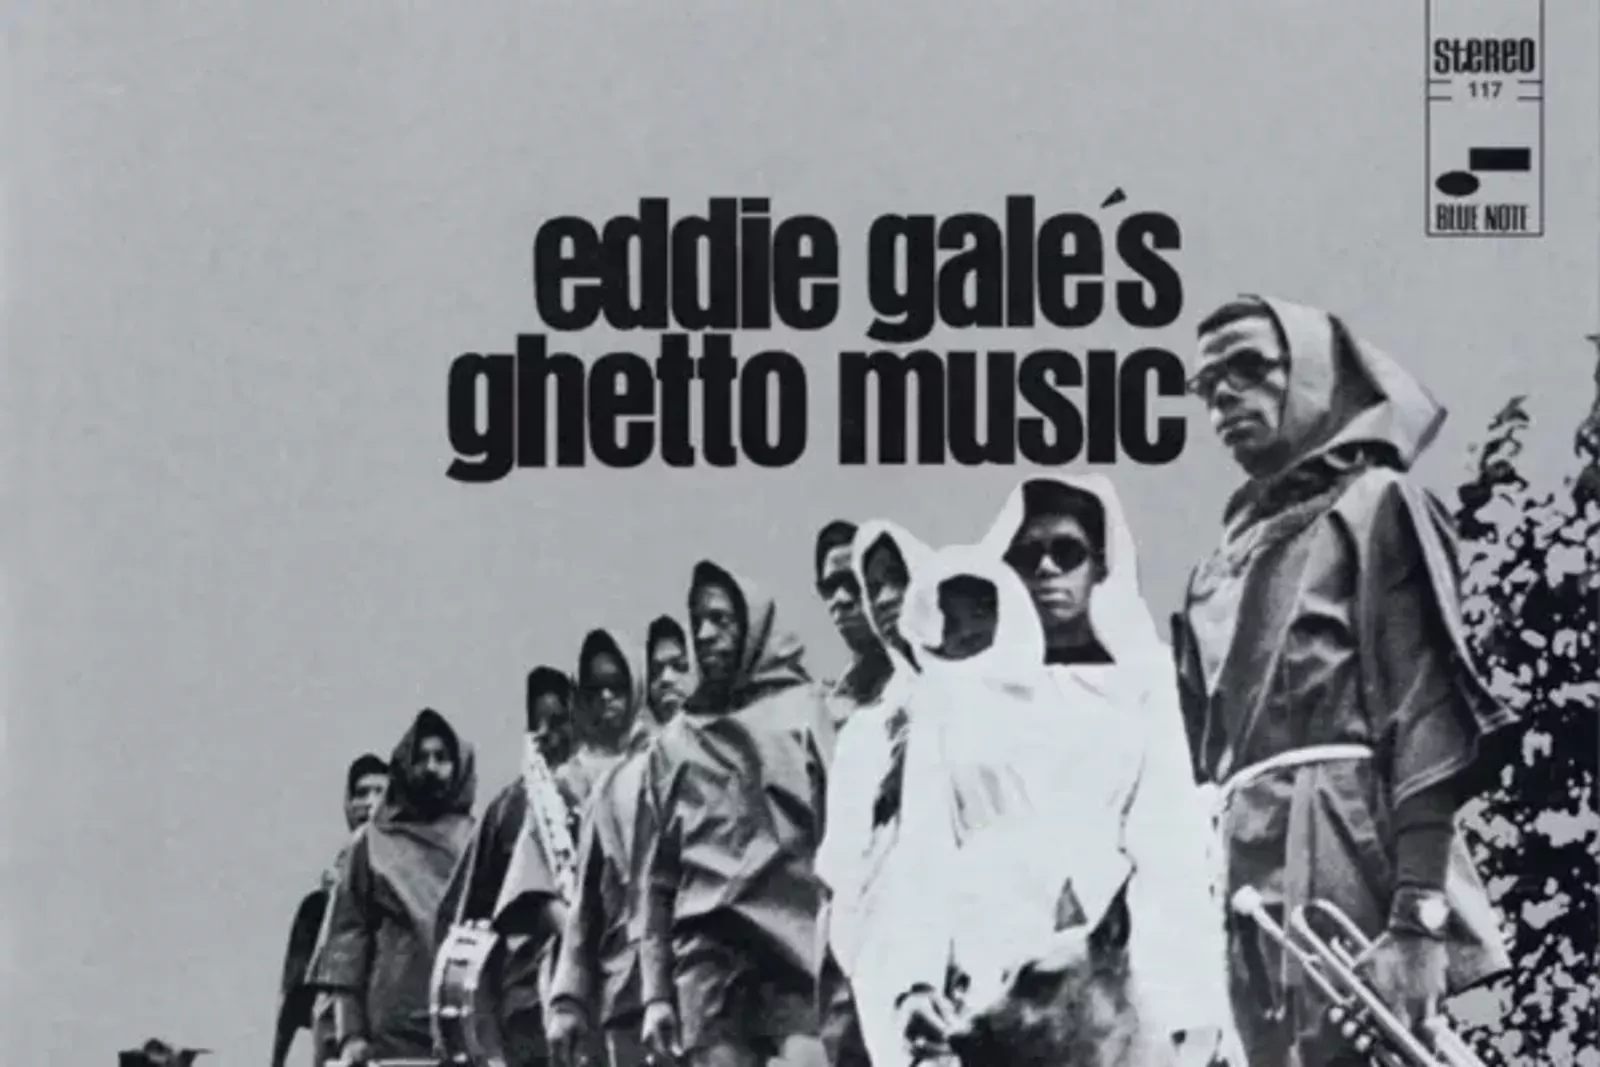 Sunday Review: Eddie Gale's "Ghetto Music"